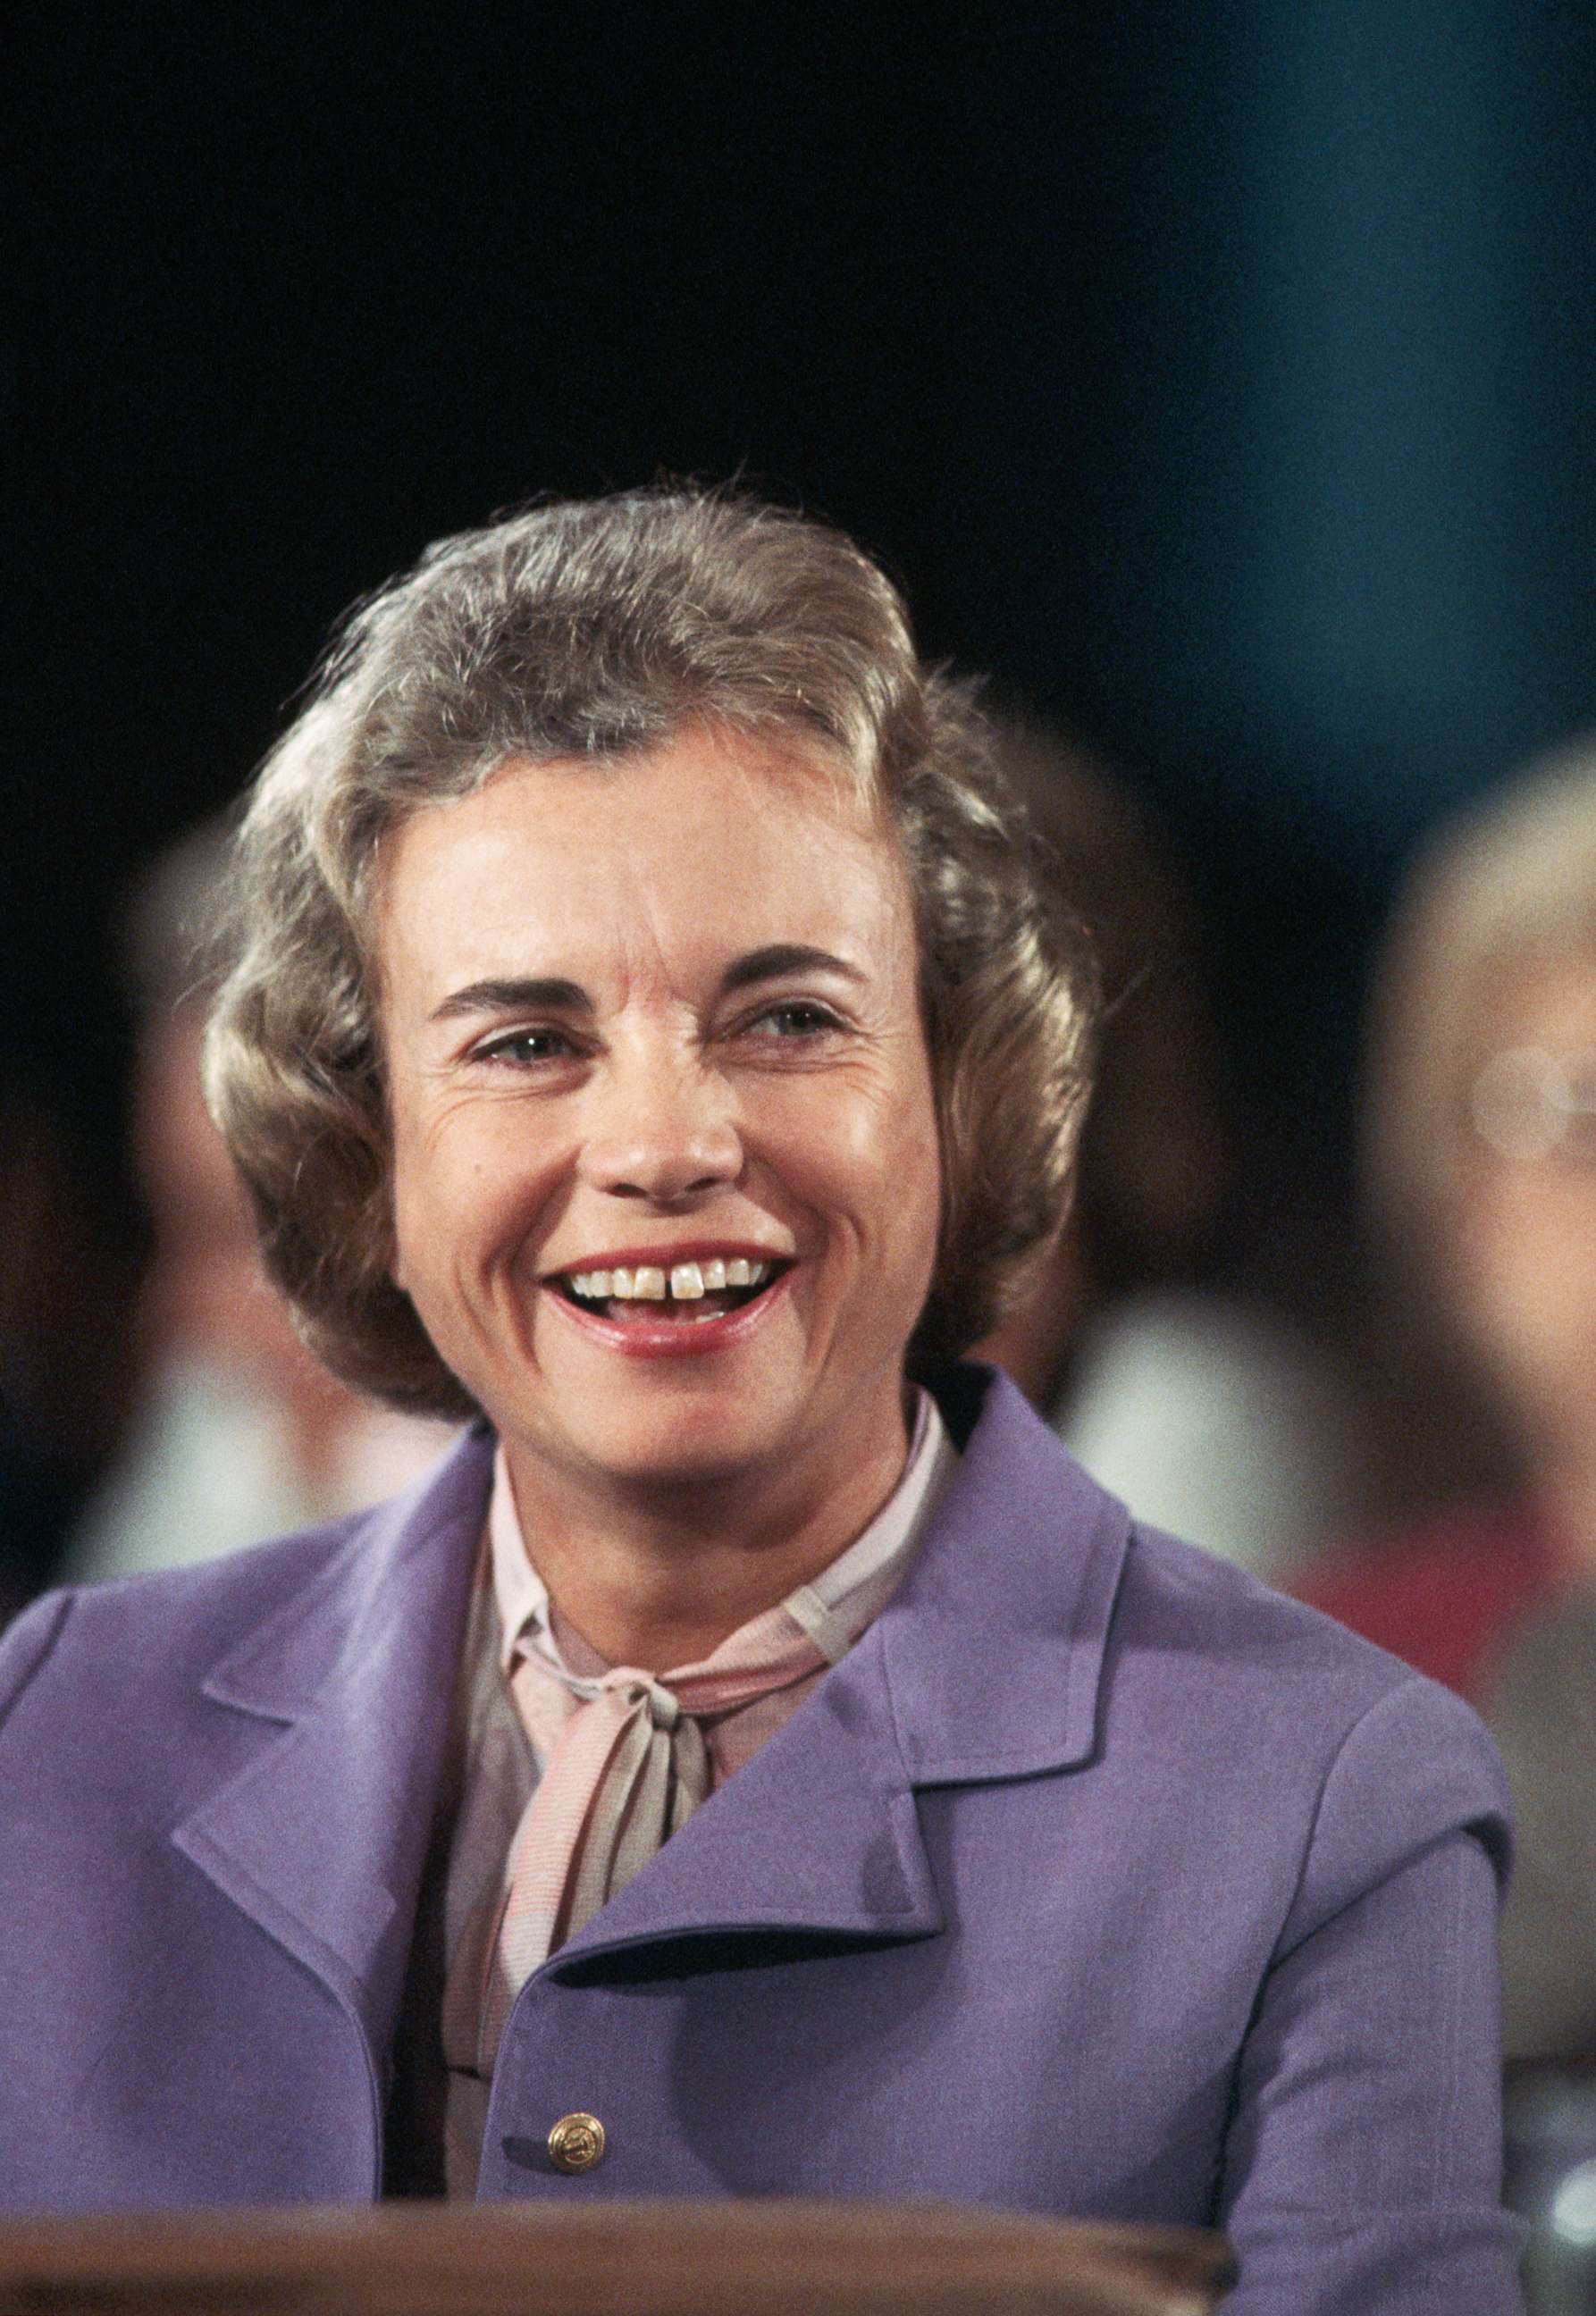 PHOTO: Sandra Day O'Connor smiles during her confirmation hearing after she was nominated to be an Associate Justice of the Supreme Court and coincidentally the first woman to serve on the Court, in Washington, Sept. 9, 1981.